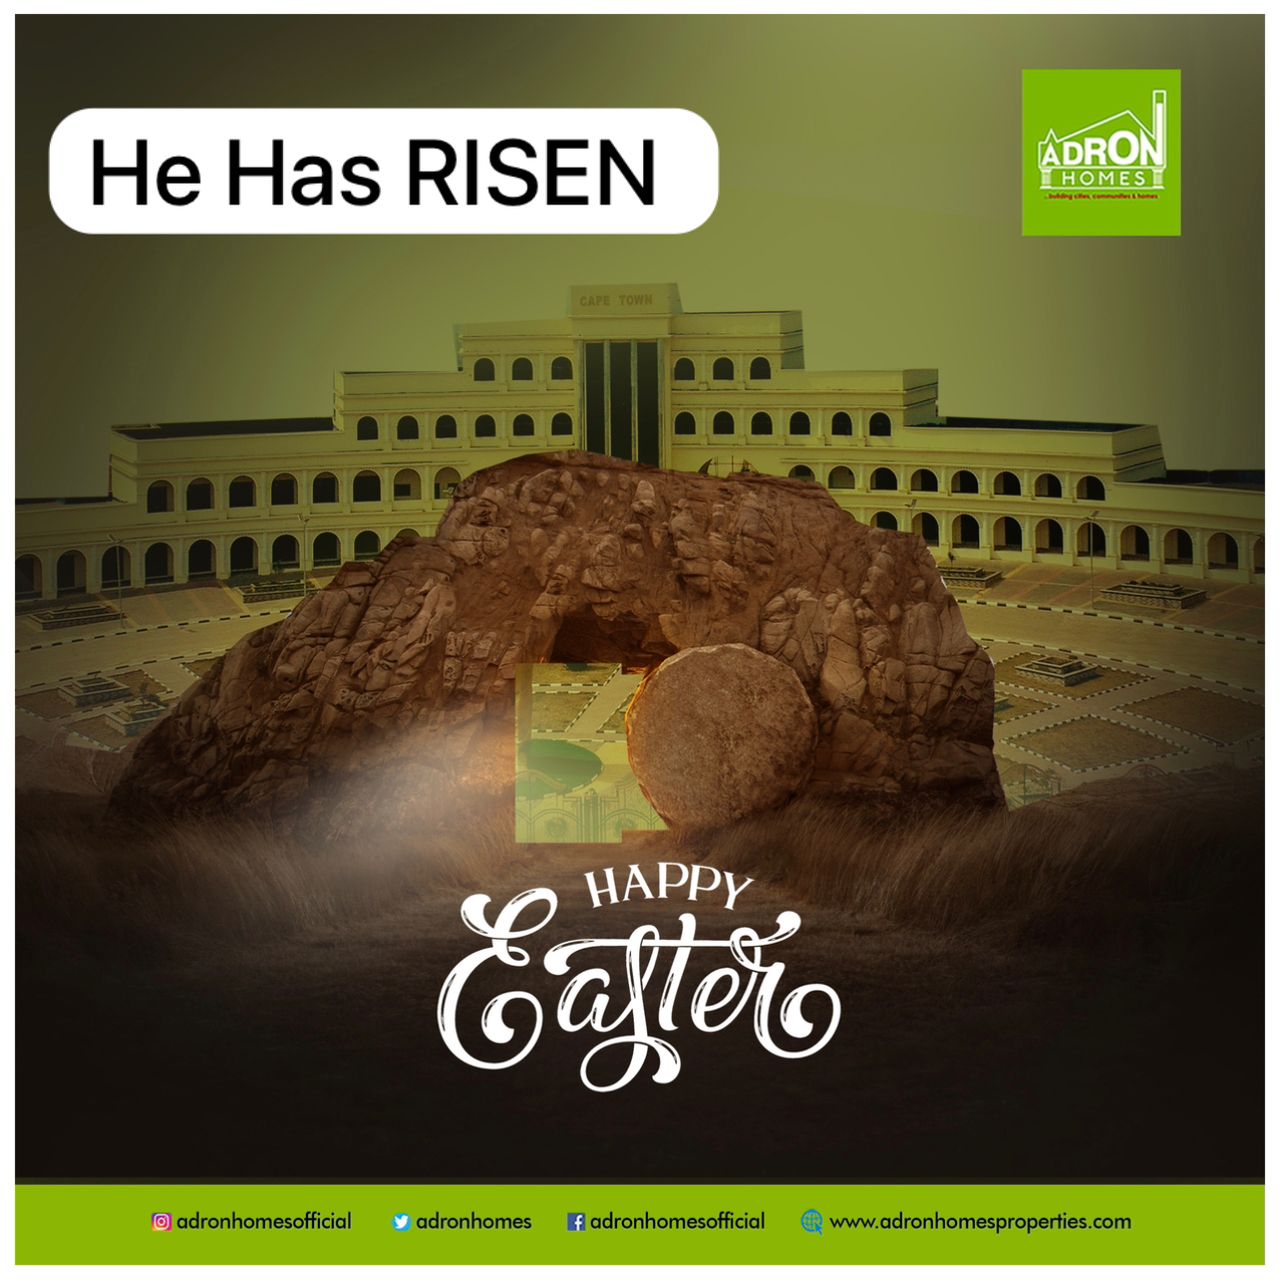 Adron Homes Extends Easter Greetings to Christian Community By Adeyemi Obadimu Veron